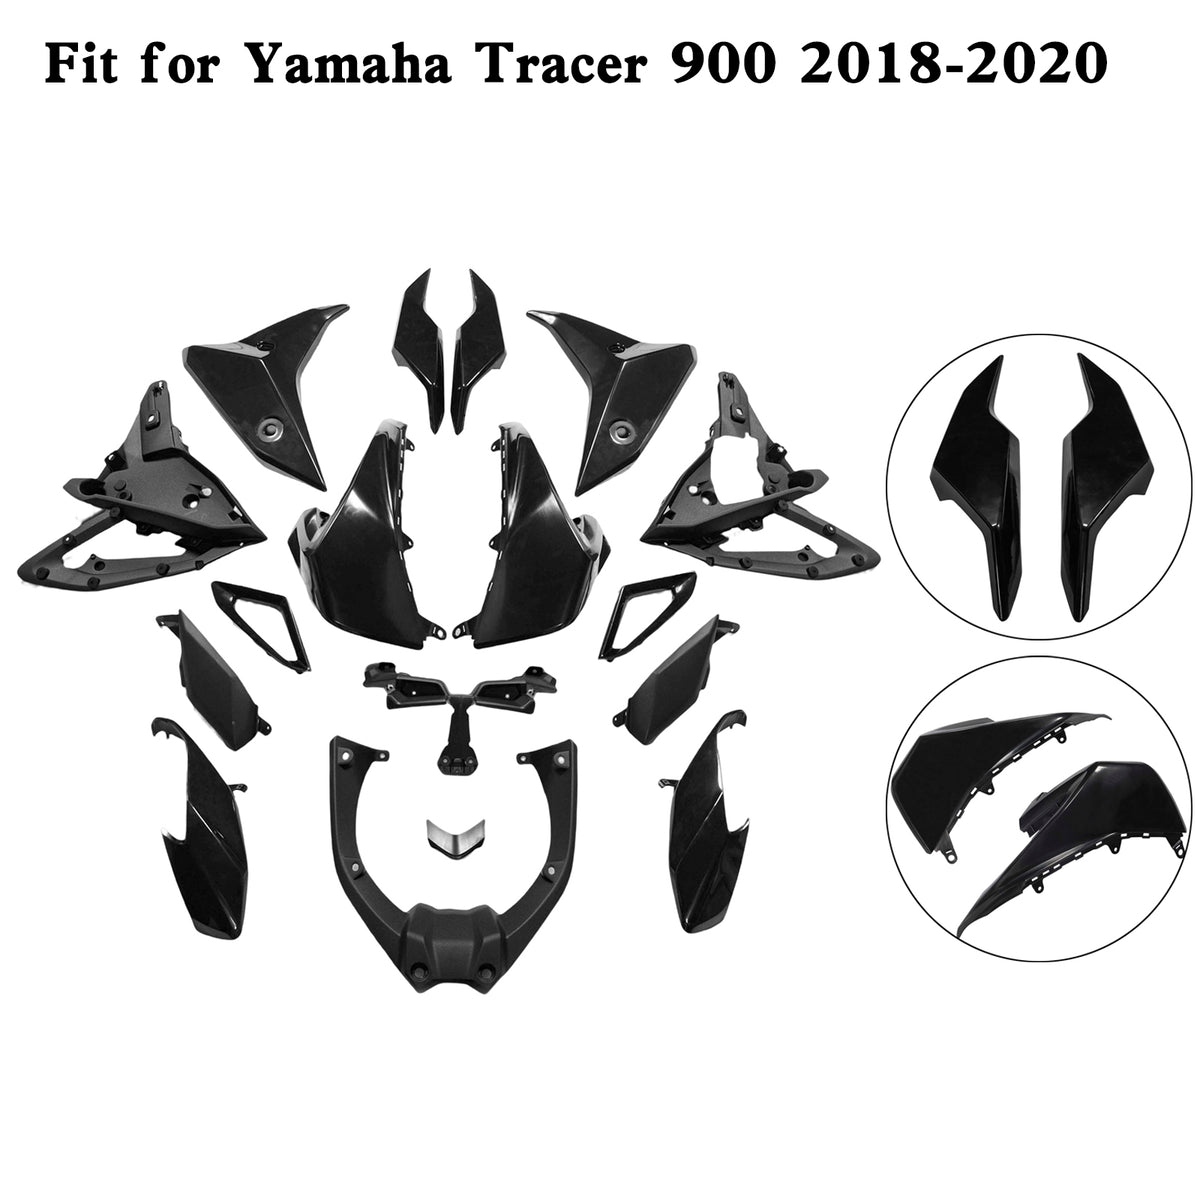 Bodywork Fairing Injection Molding Unpainted for Yamaha Tracer 900/GT 2018-2020